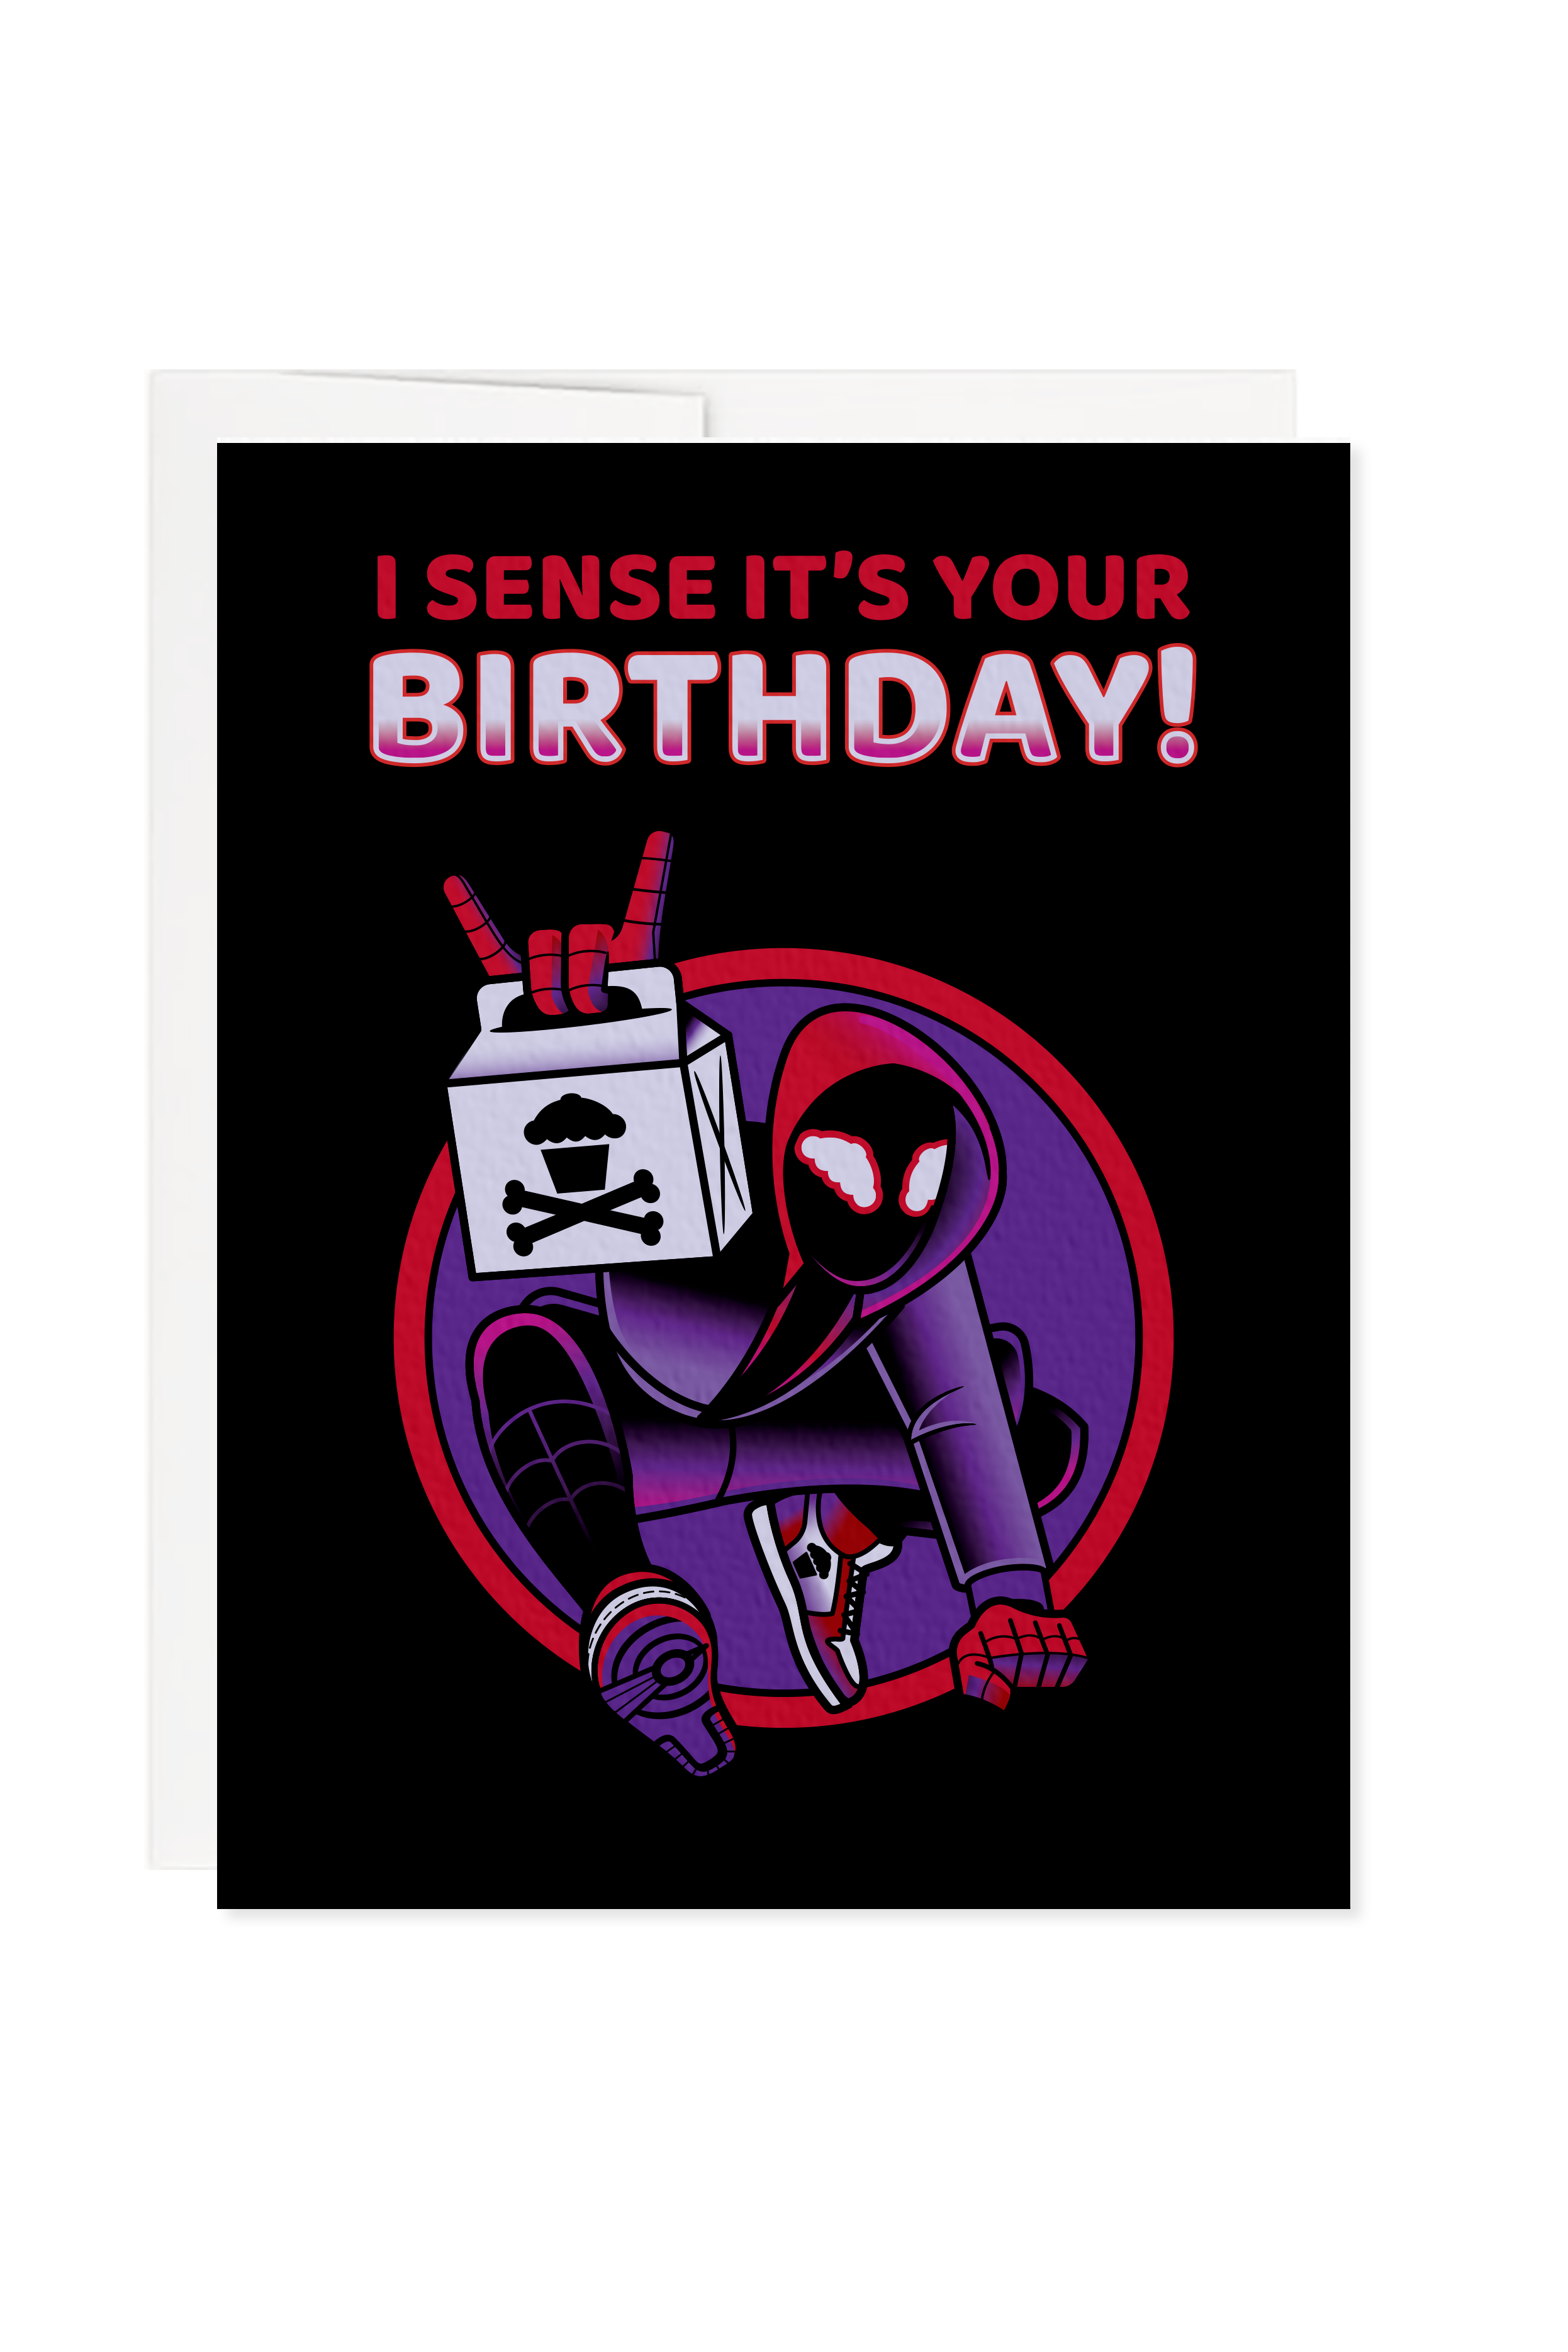 I Sense It's Your Bday Greeting Card